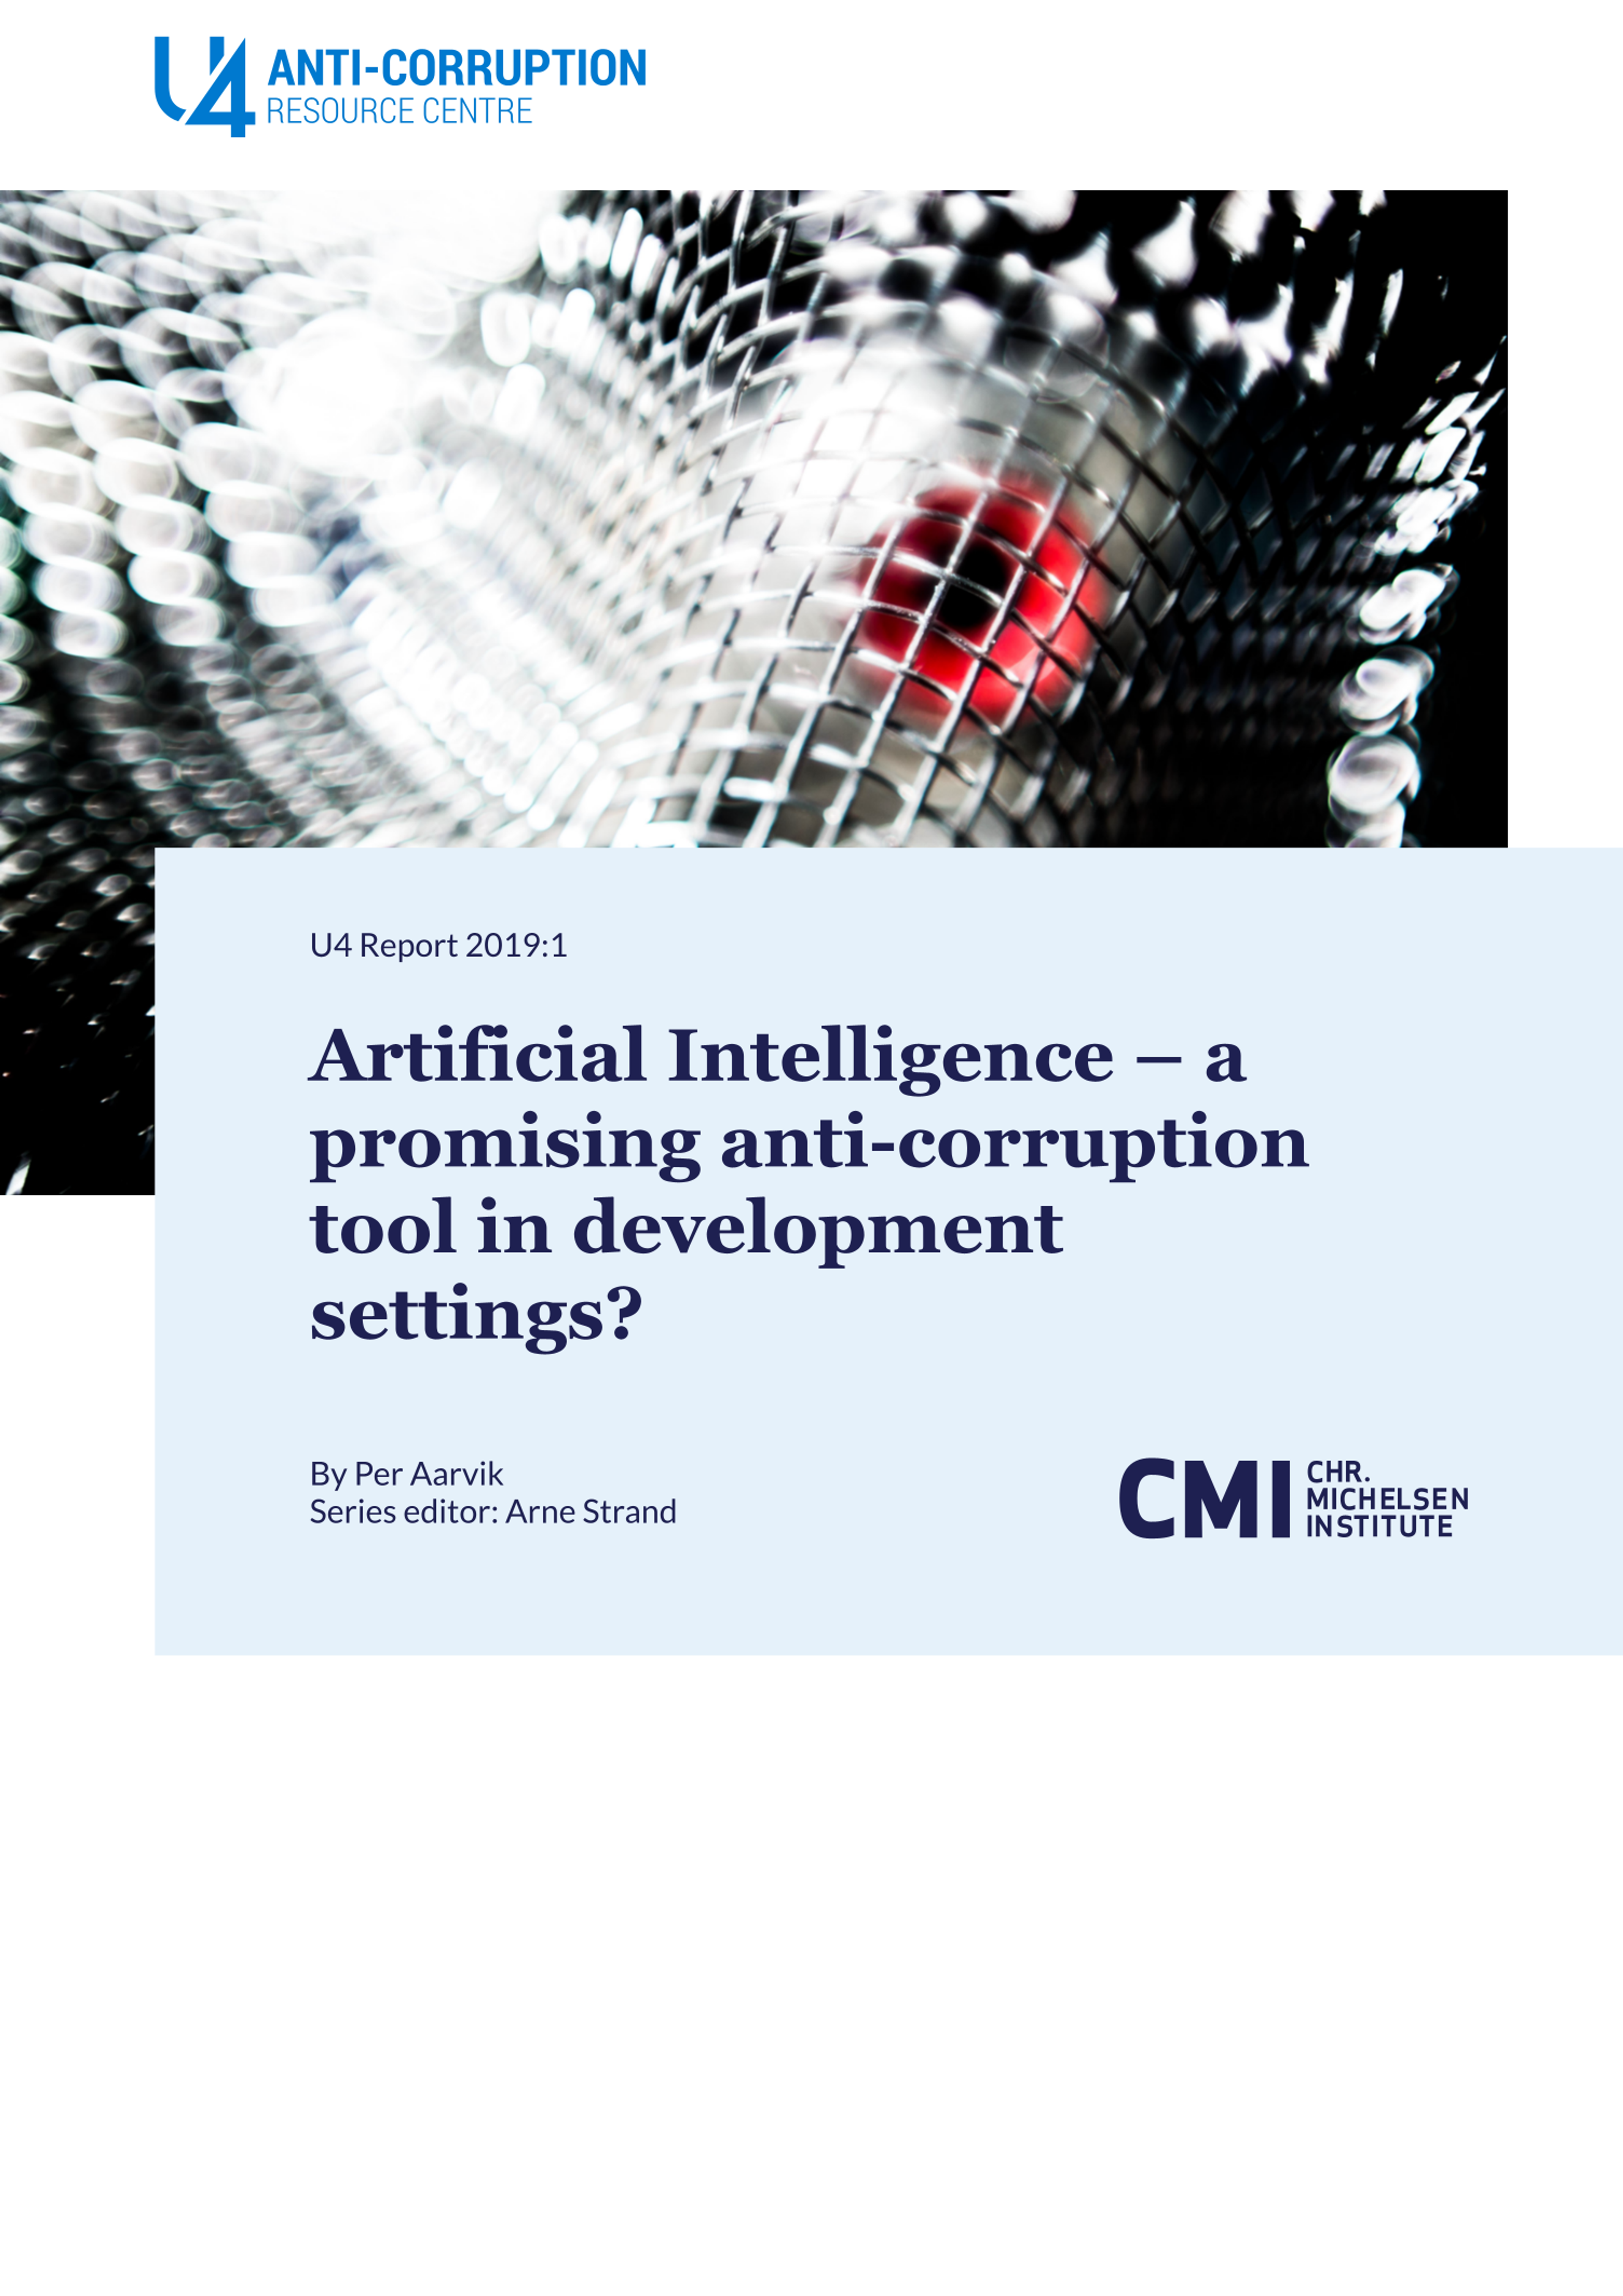 Artificial Intelligence – a promising anti-corruption tool in development settings?